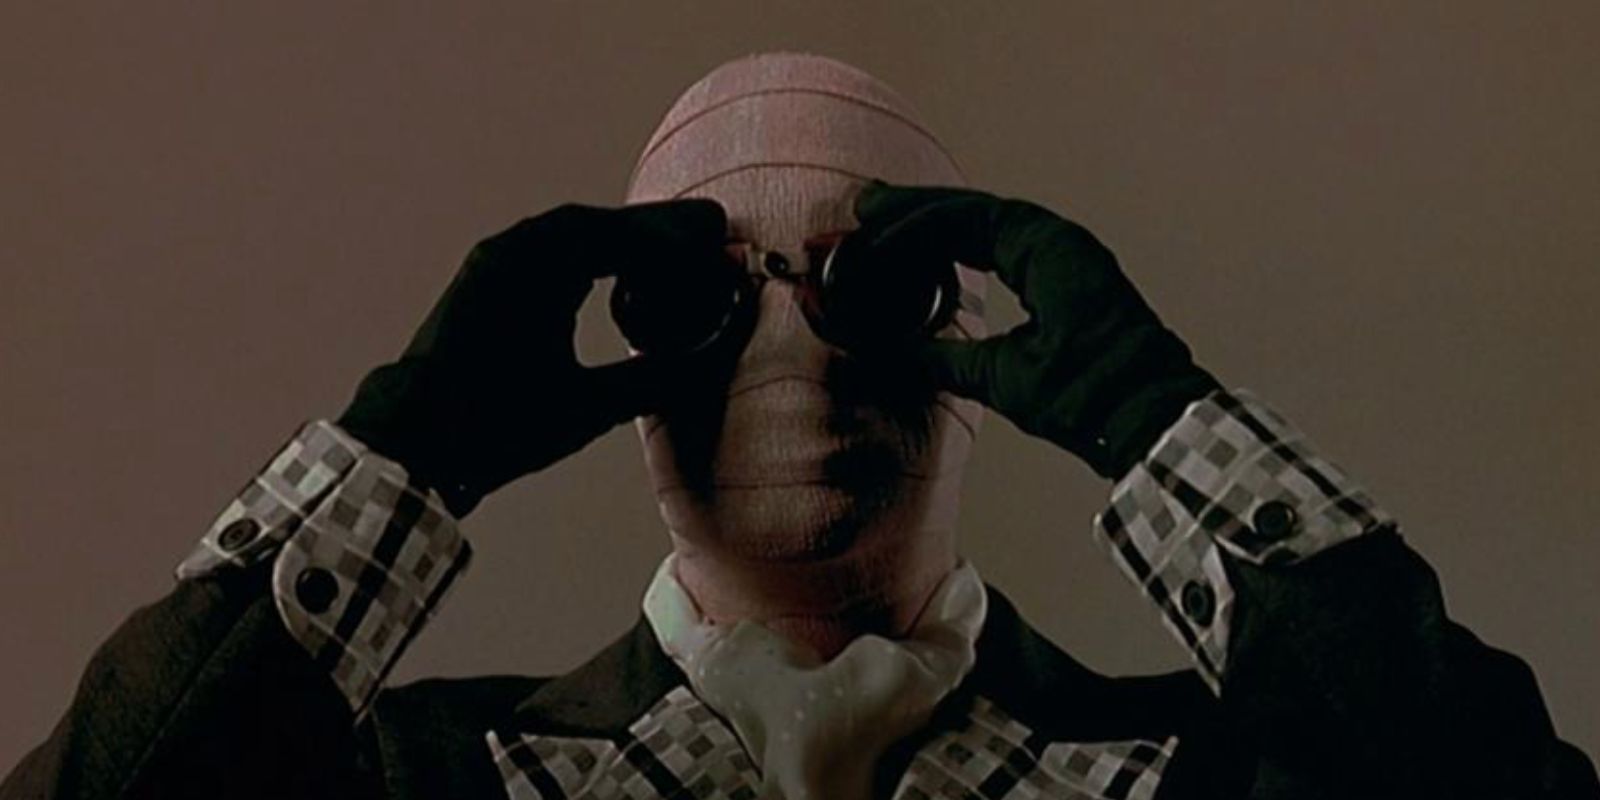 Chevy Chase As Nick Halloway in Memoirs Of An Invisible Man